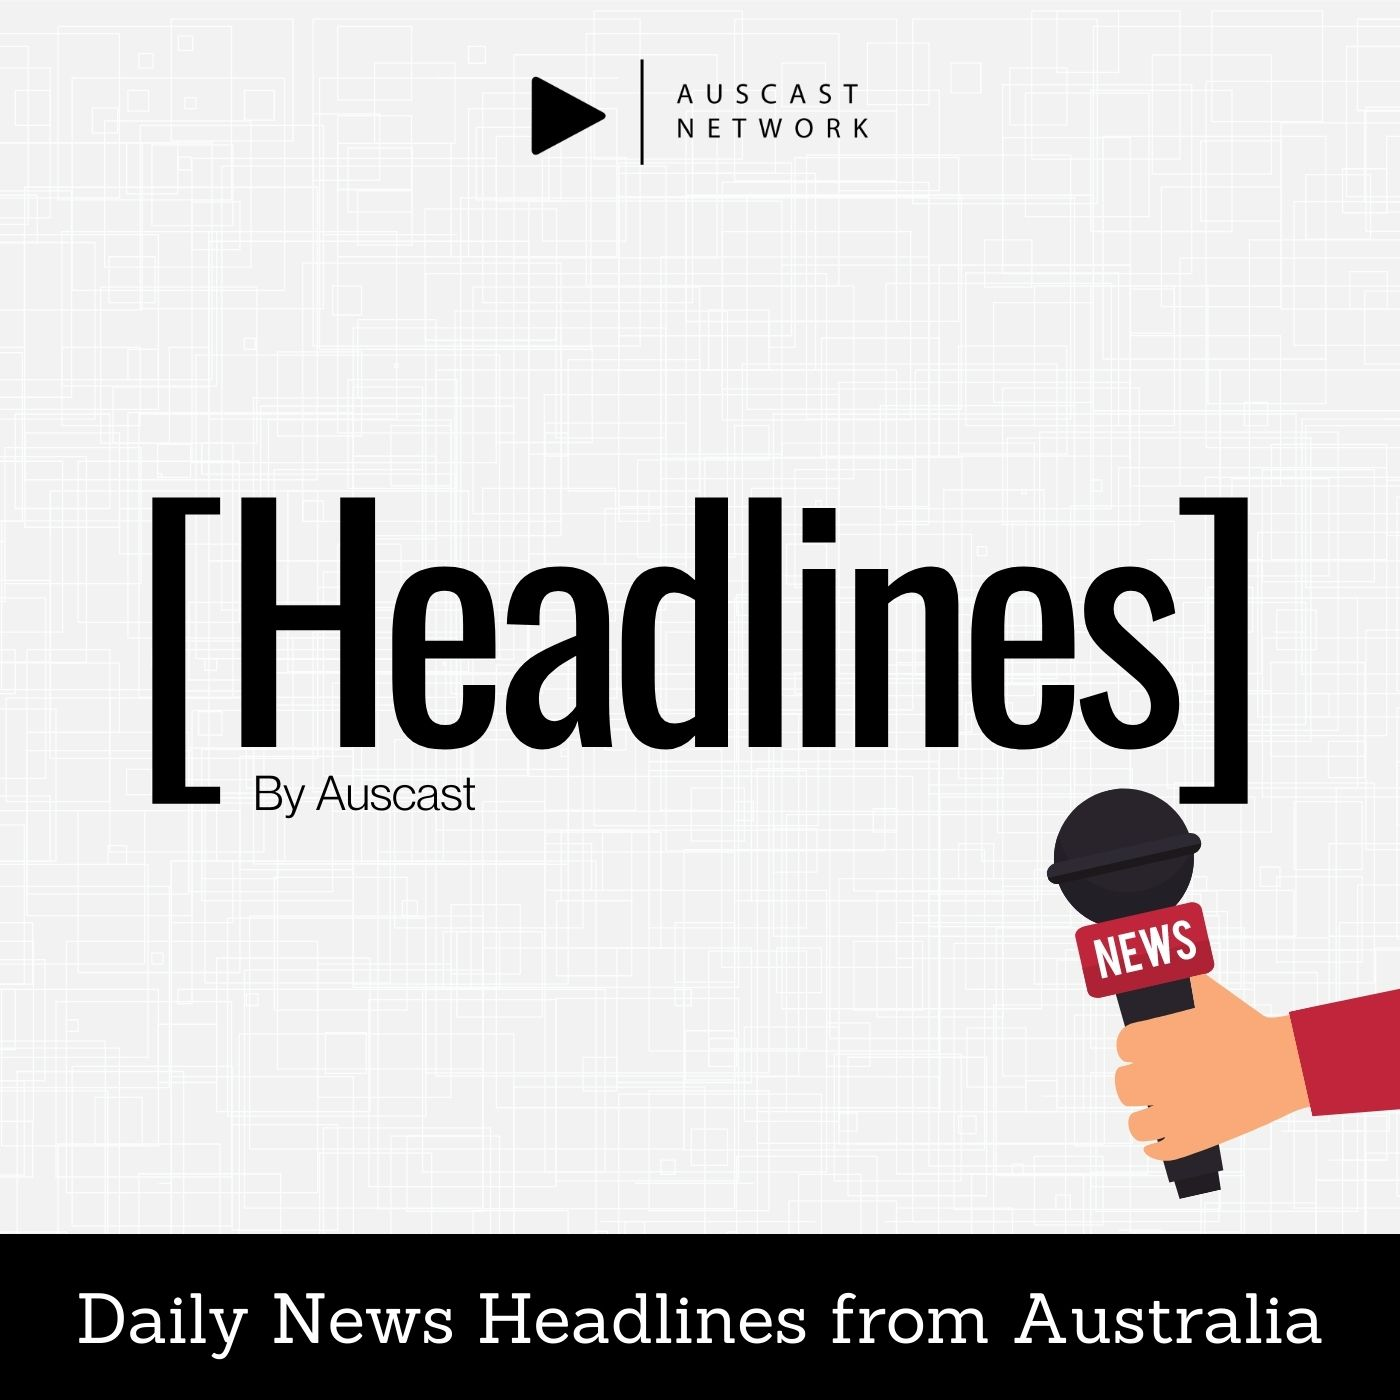 More COVID exposure sites for Brisbane, Vaccination rates, New defence project, Game of Thrones & more  -  Wednesday March 31, 2021 - Headlines by Auscast